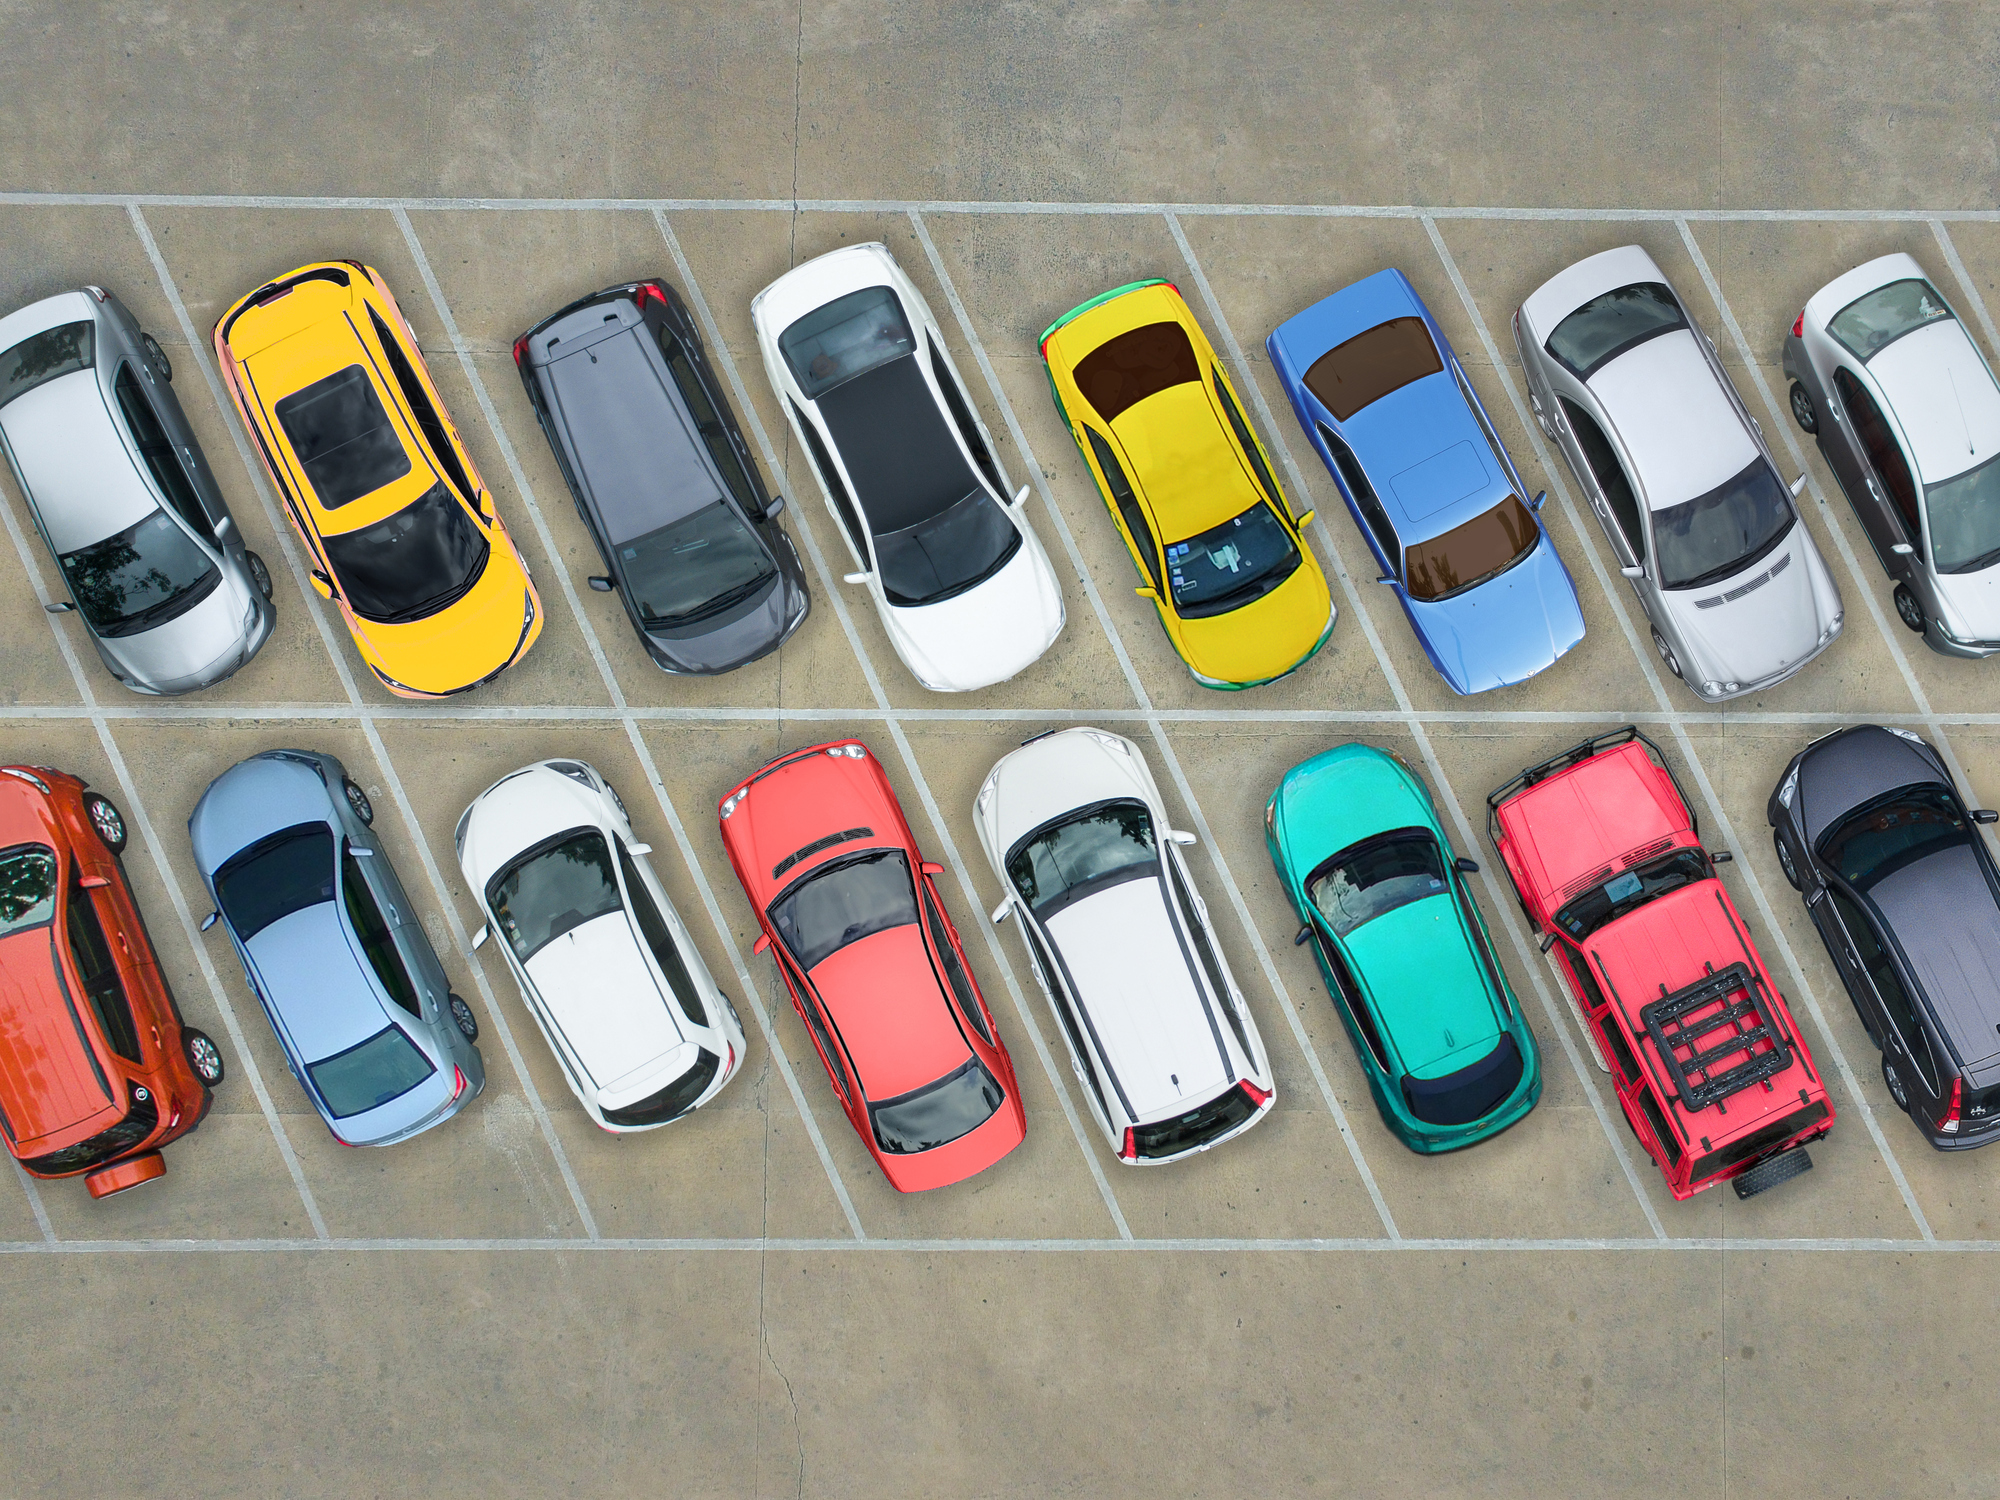 The Parking REIT Sells Majority Stake to Bombe Asset Management